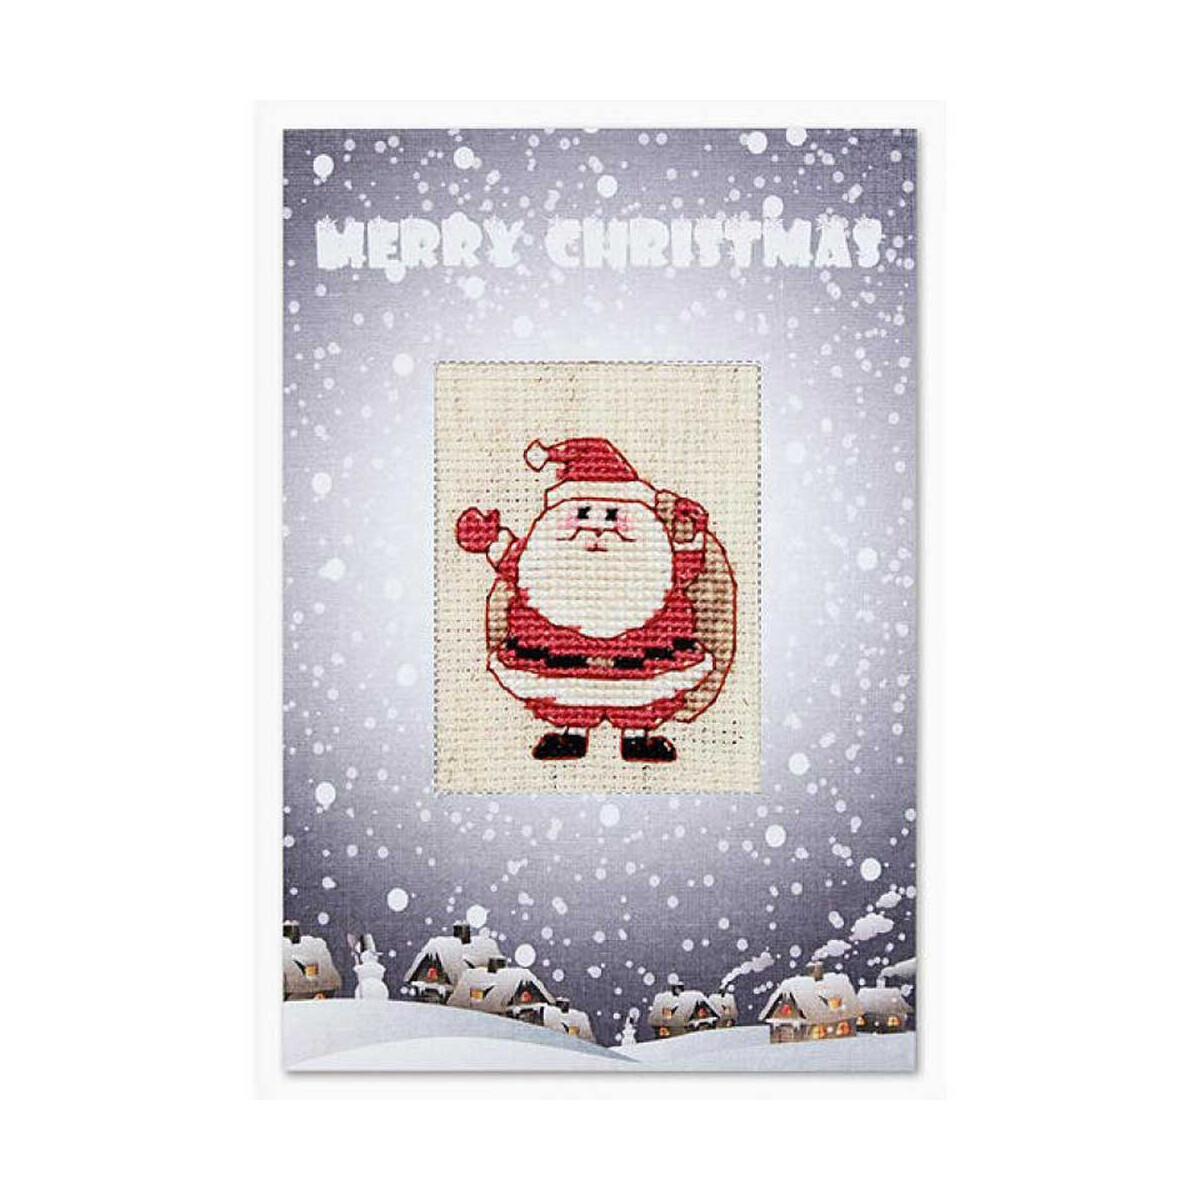 A Christmas card shows a cross-stitch Santa Claus in the...